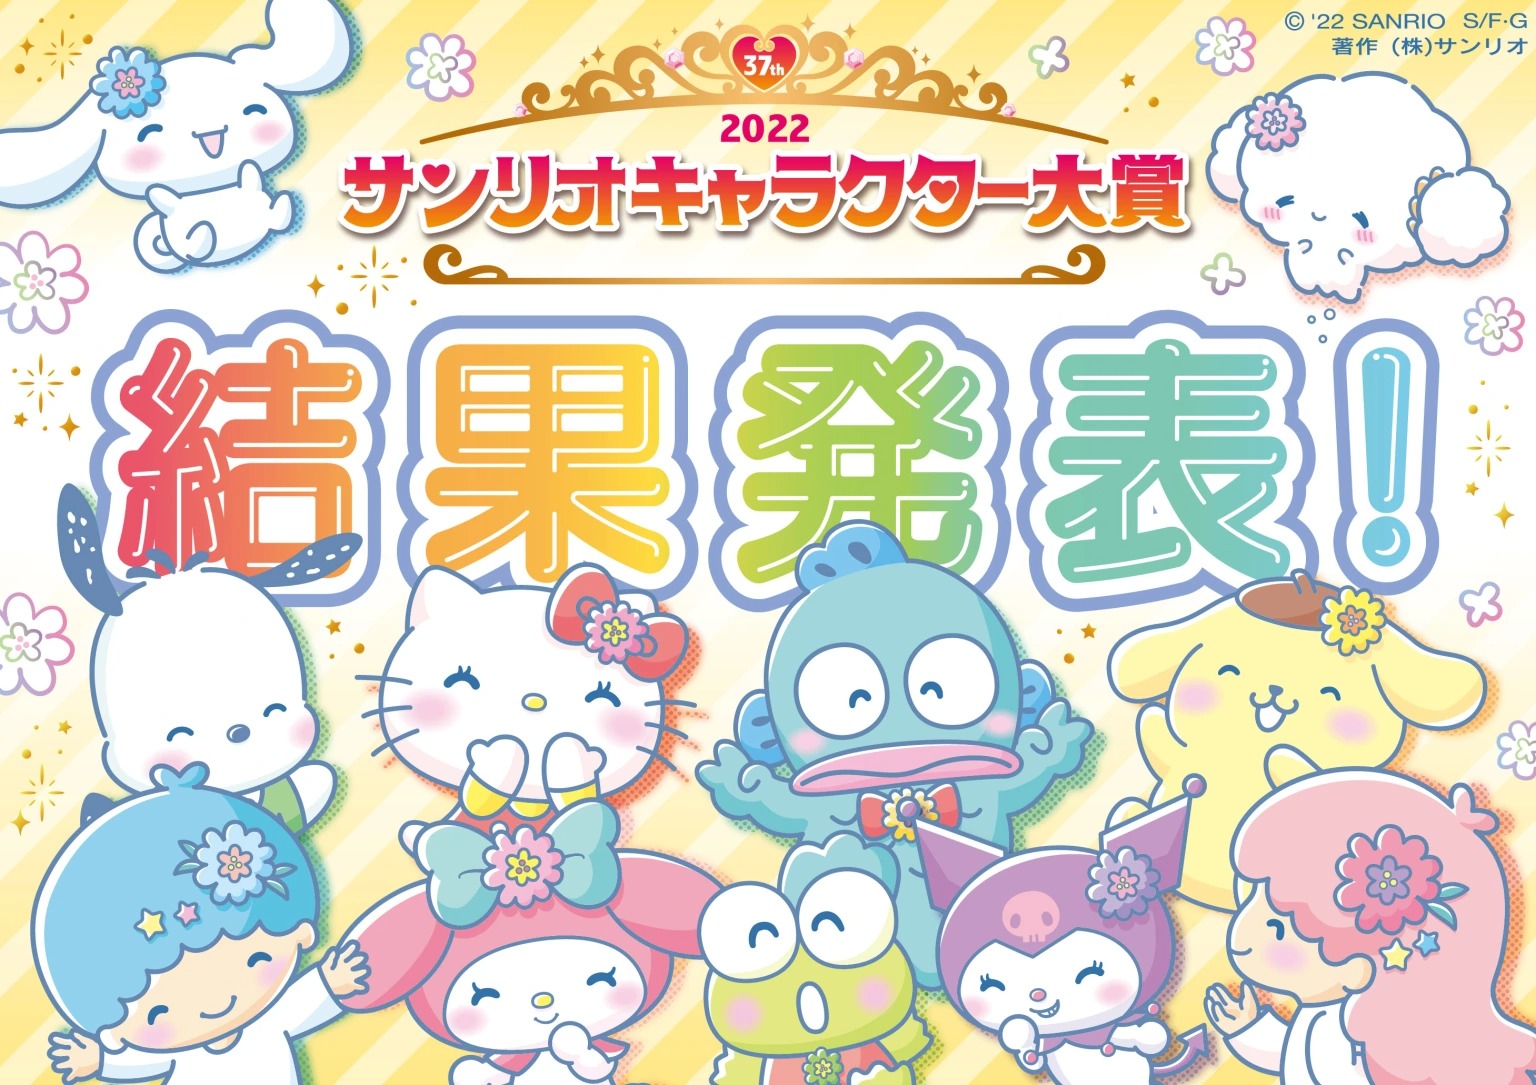 Sanrio’s 2022 popularity ranking brings fans to tears after character’s